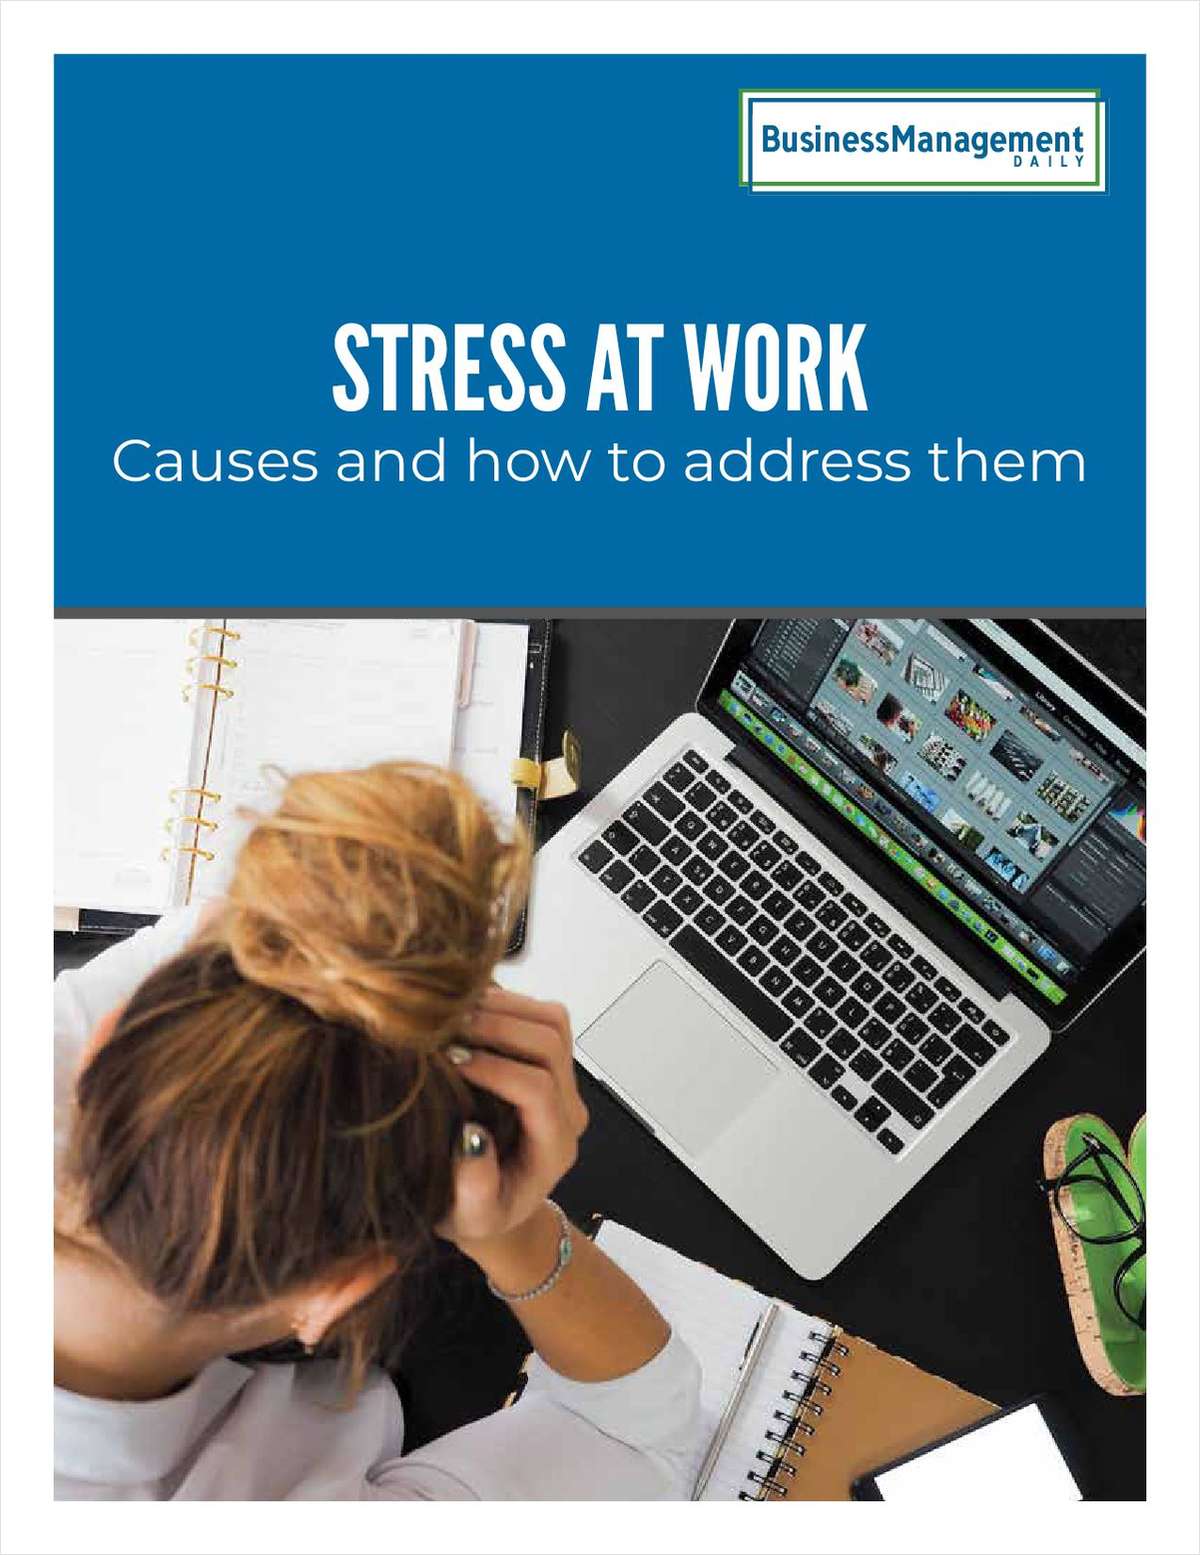 Stress at Work: Causes and how to address them